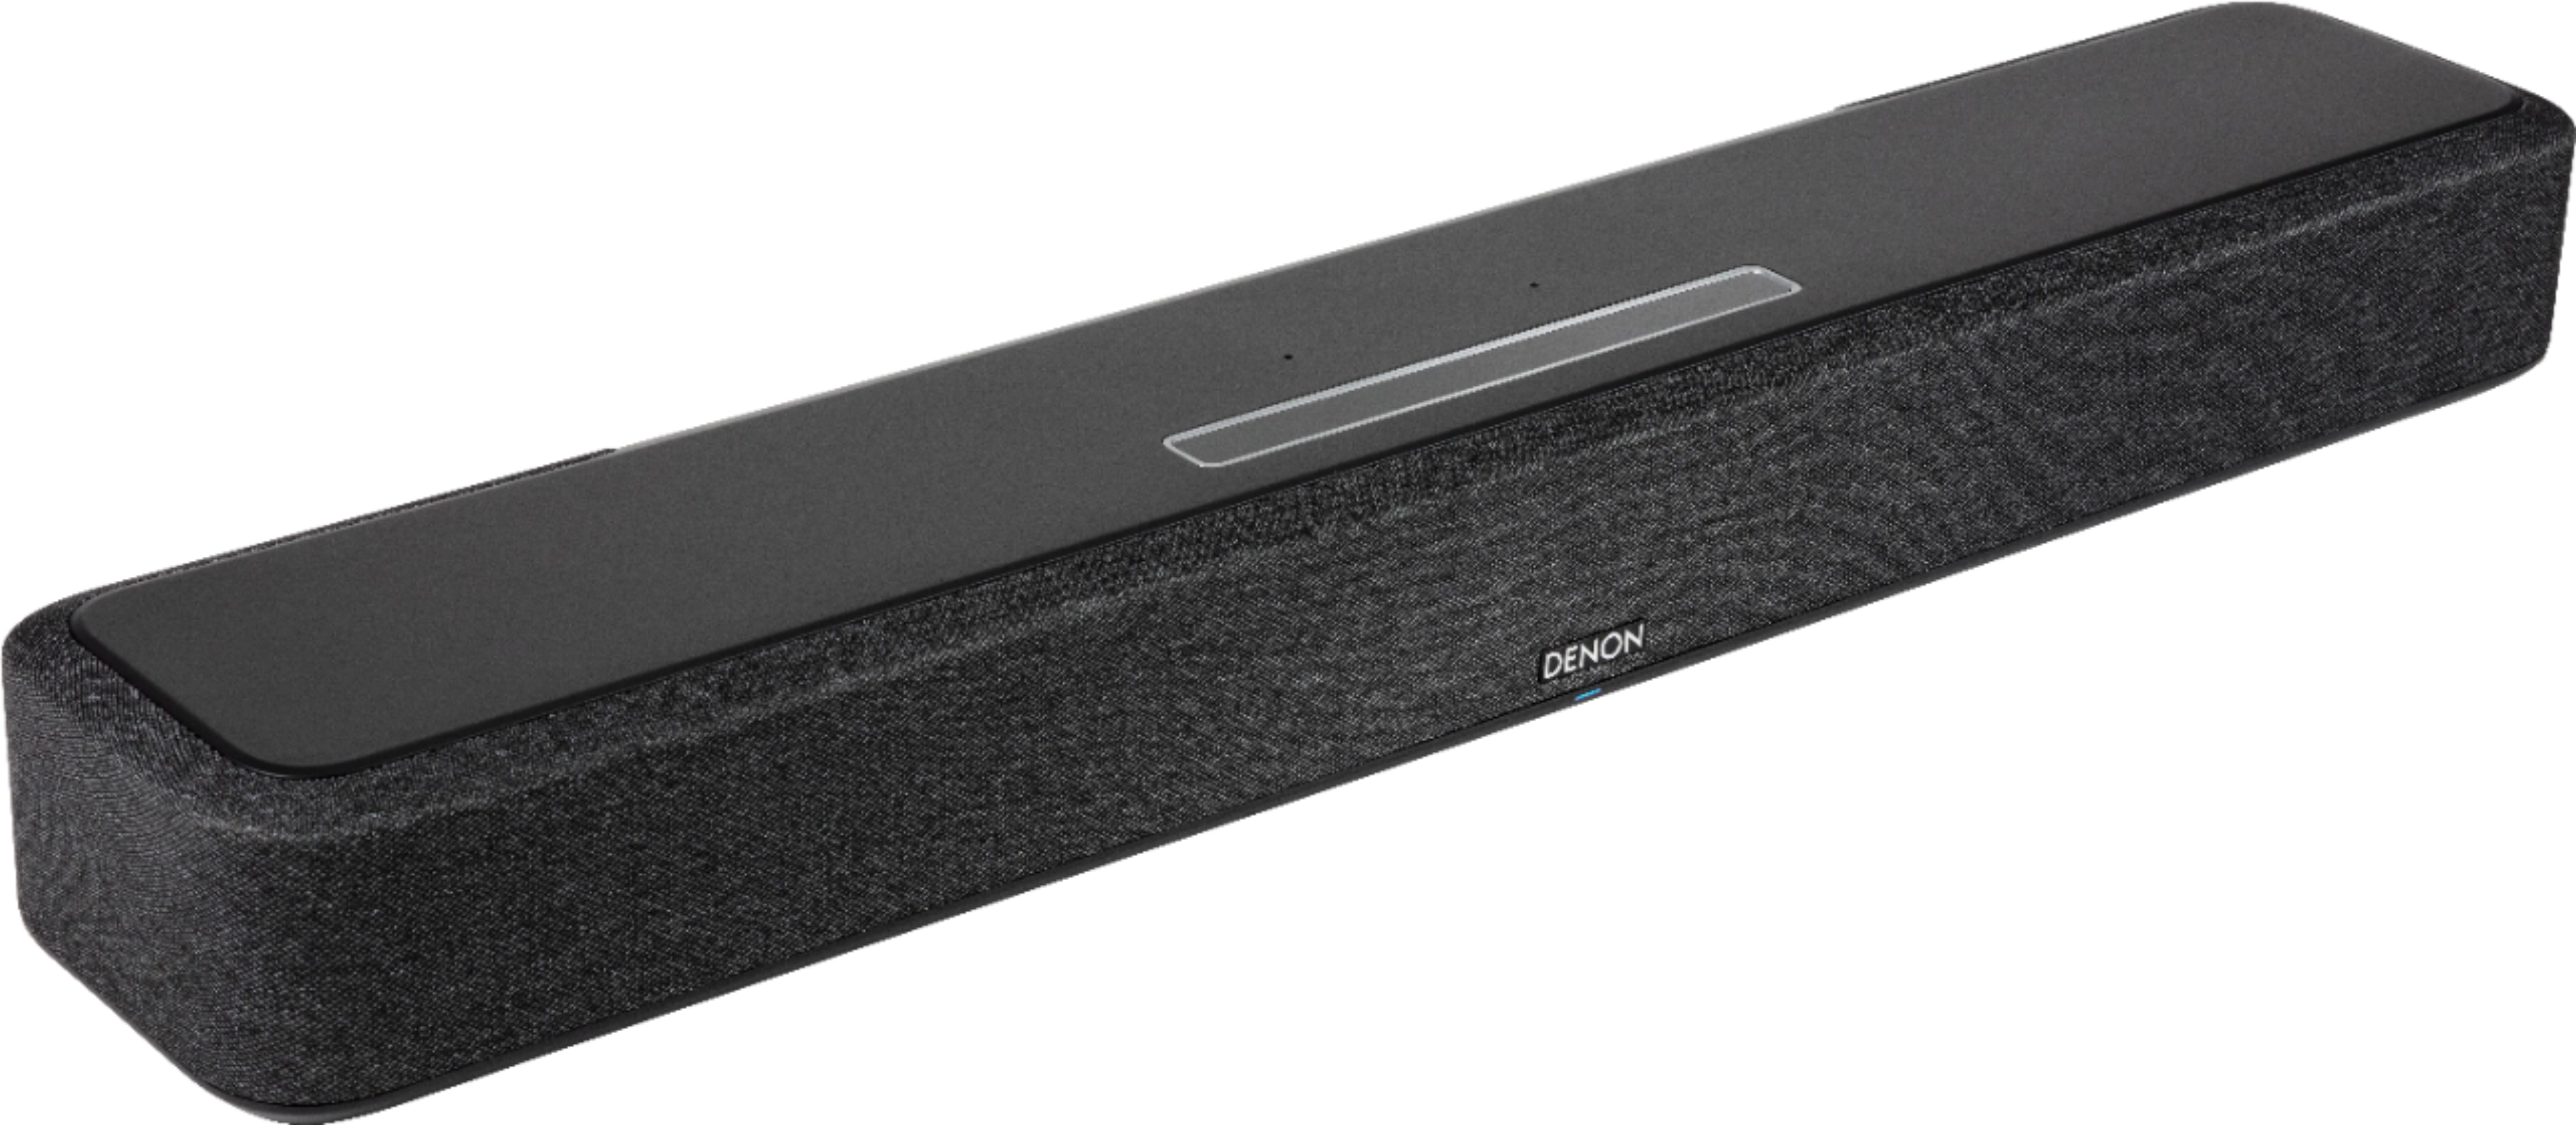 Denon Home Sound Bar 550 with 3D Audio, Dolby Atmos & DTS:X, Built-in HEOS & Alexa Black Sound 550 - Best Buy